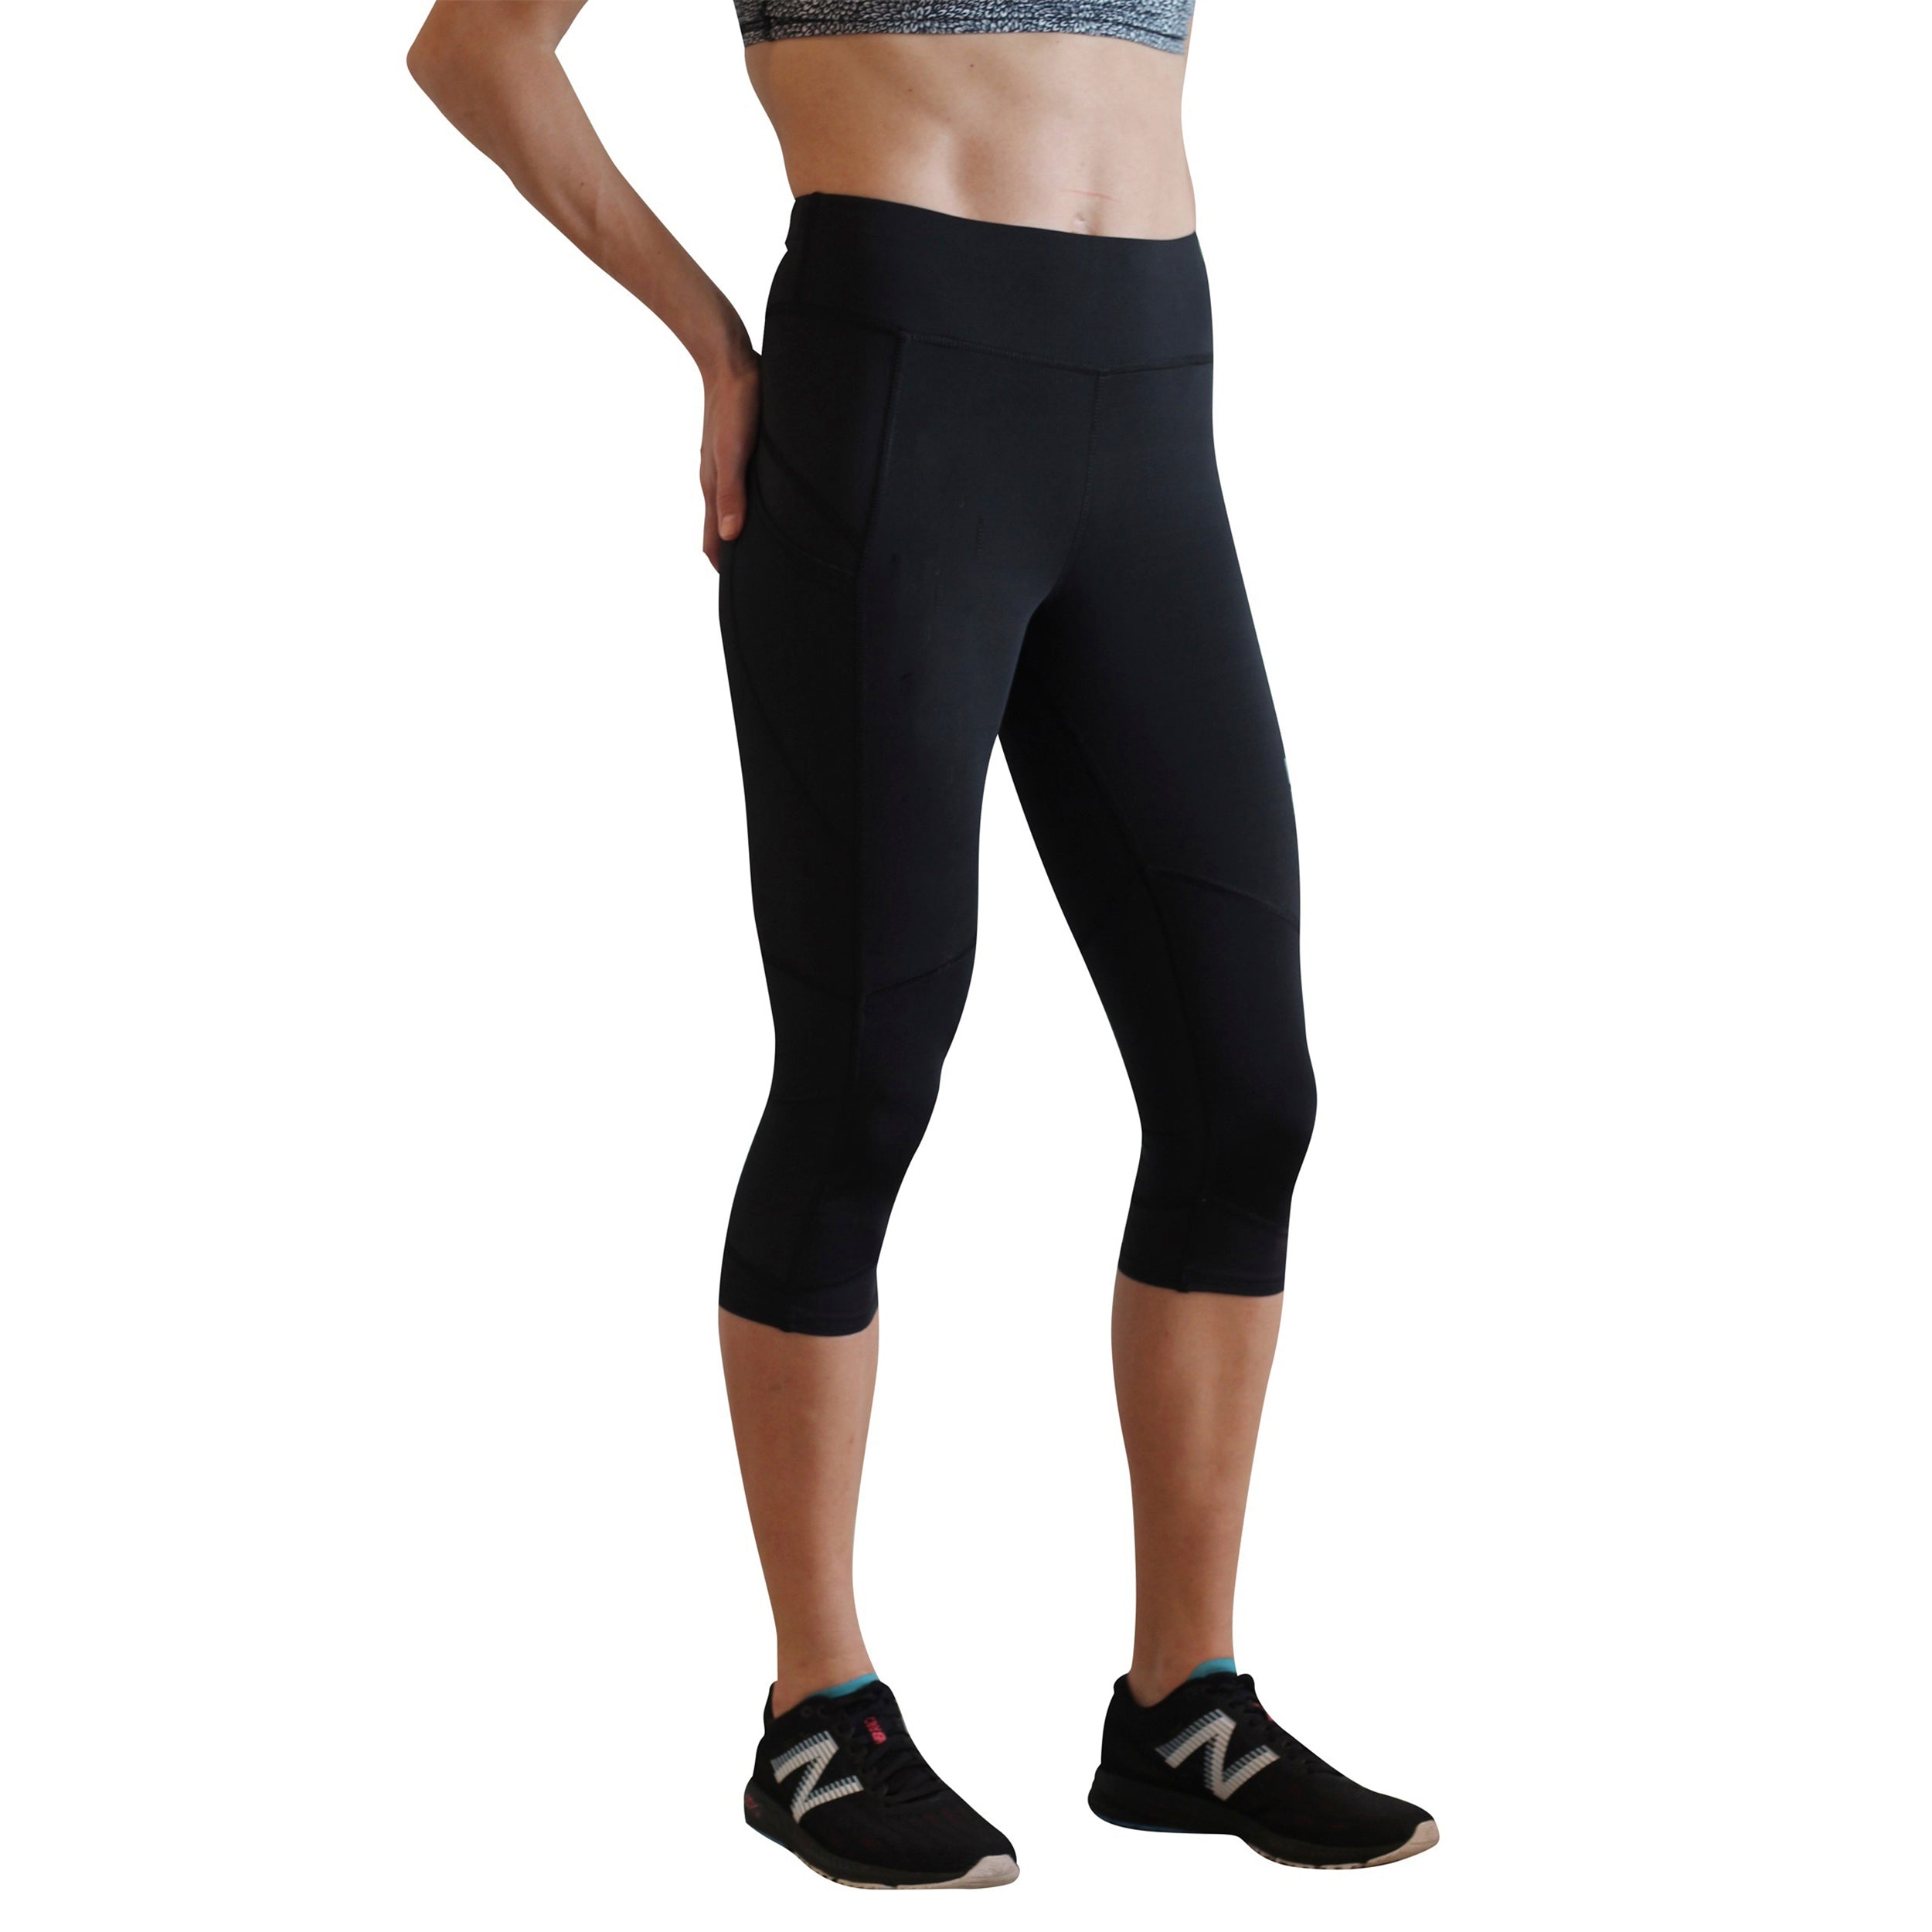 CompressionZ High Waisted Women's Yoga Leggings Running Gym Fitness Workout  Pants Plus Size Compression (Black, 2XL)